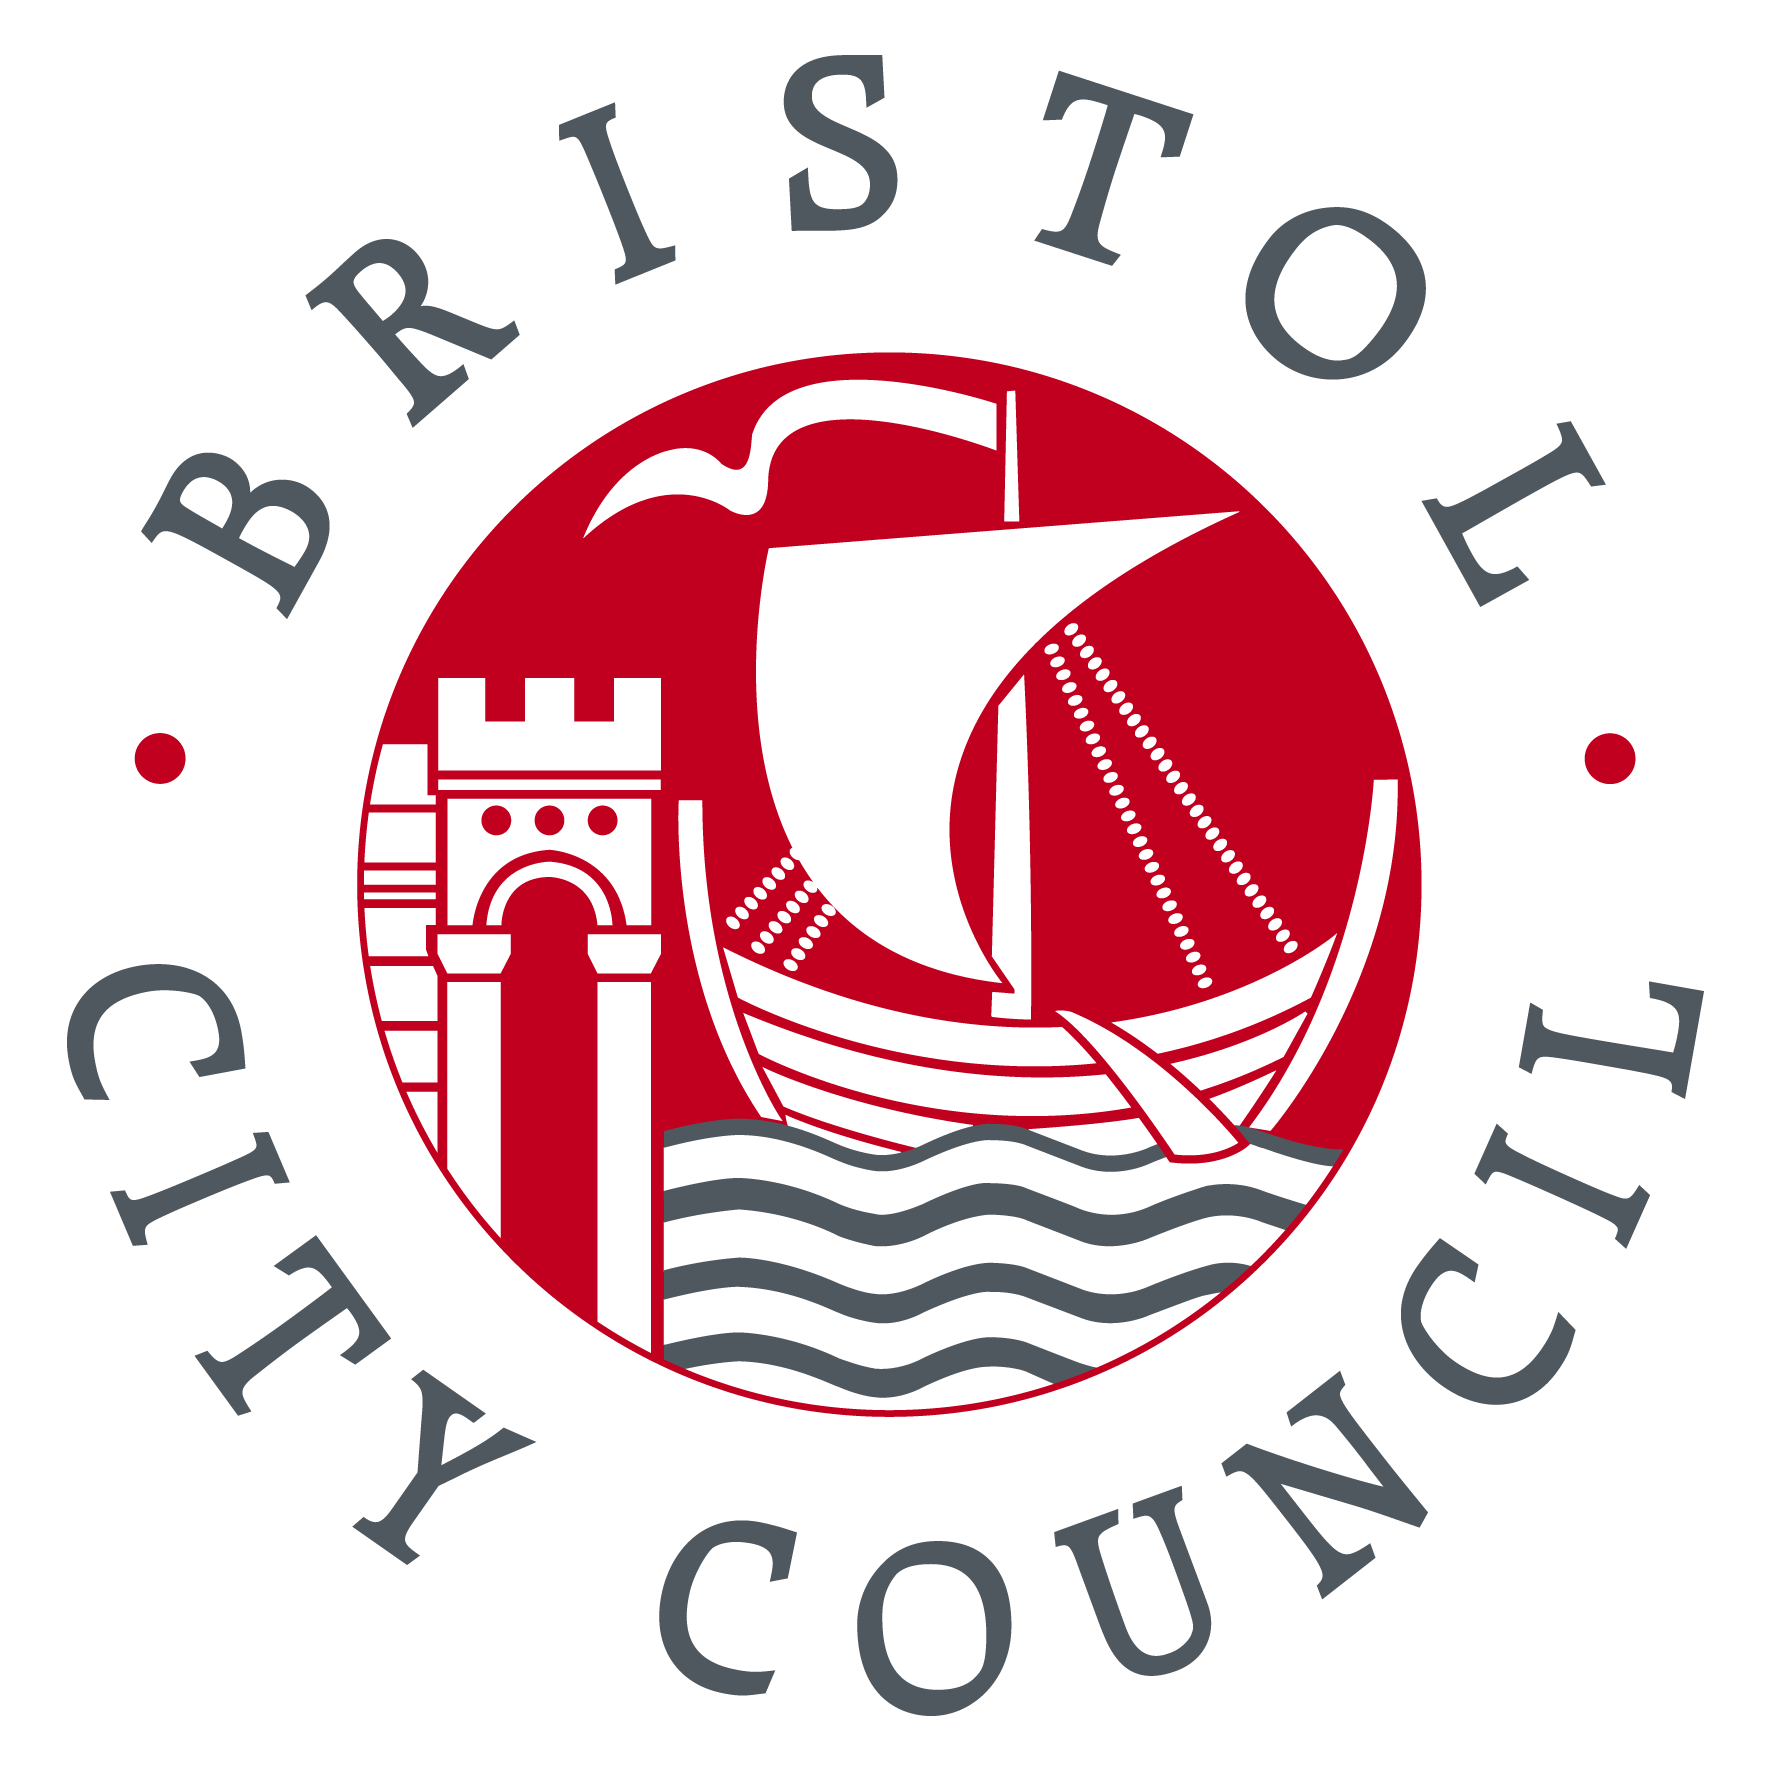 supported by Bristol City Council Funding